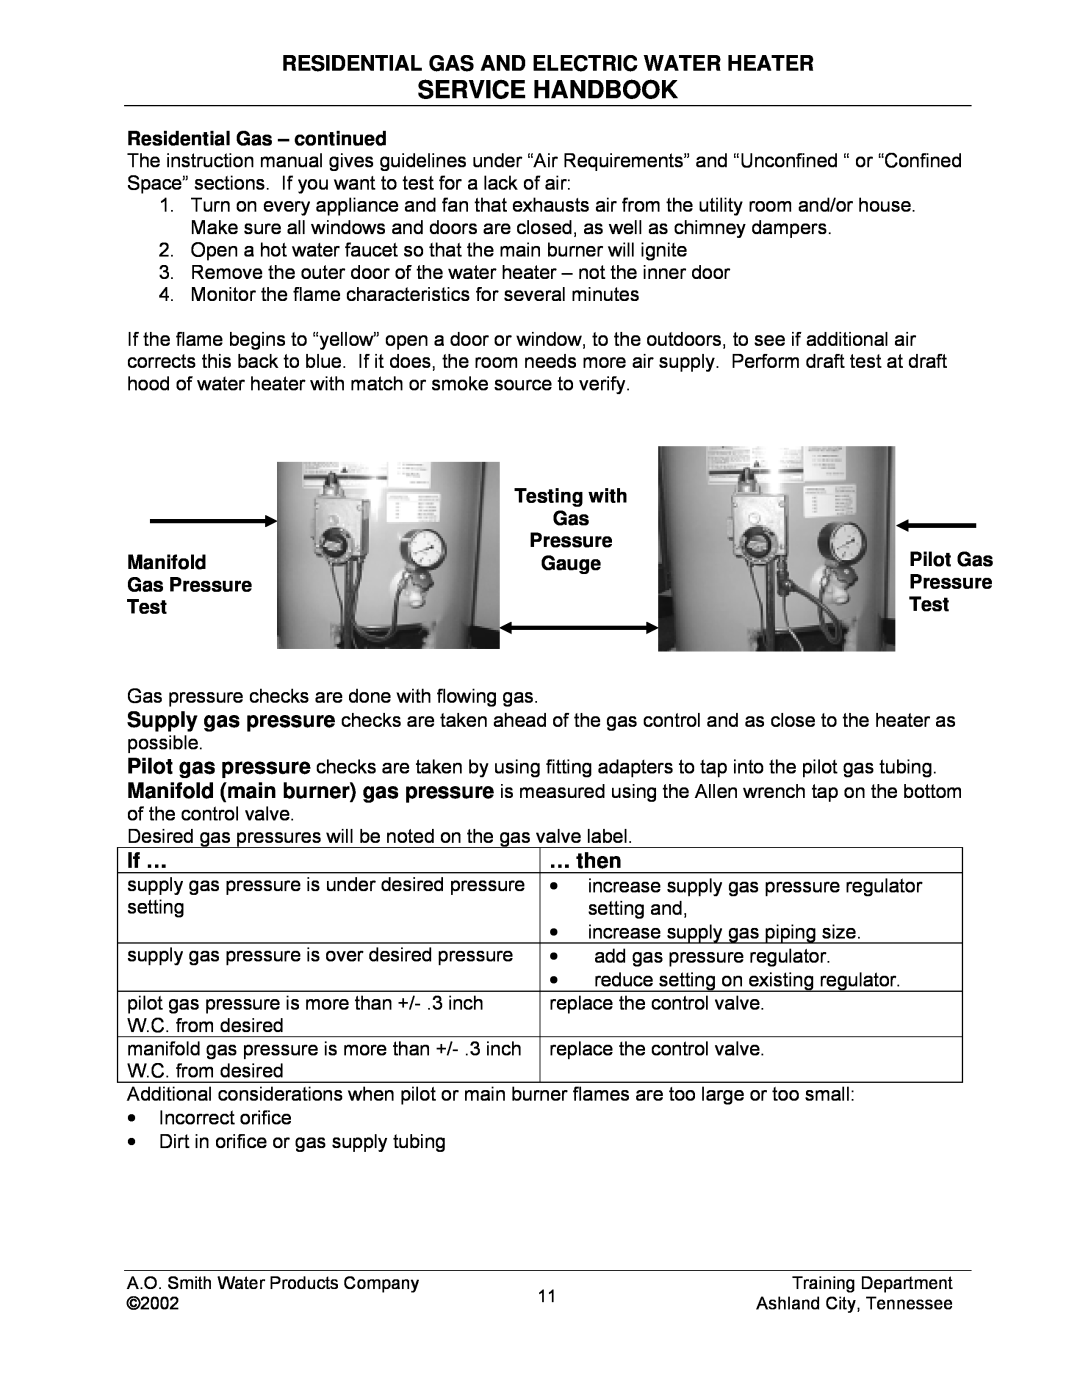 A.O. Smith TC-049-R2 Service Handbook, Residential Gas And Electric Water Heater, If …, … then, Testing with, Pressure 